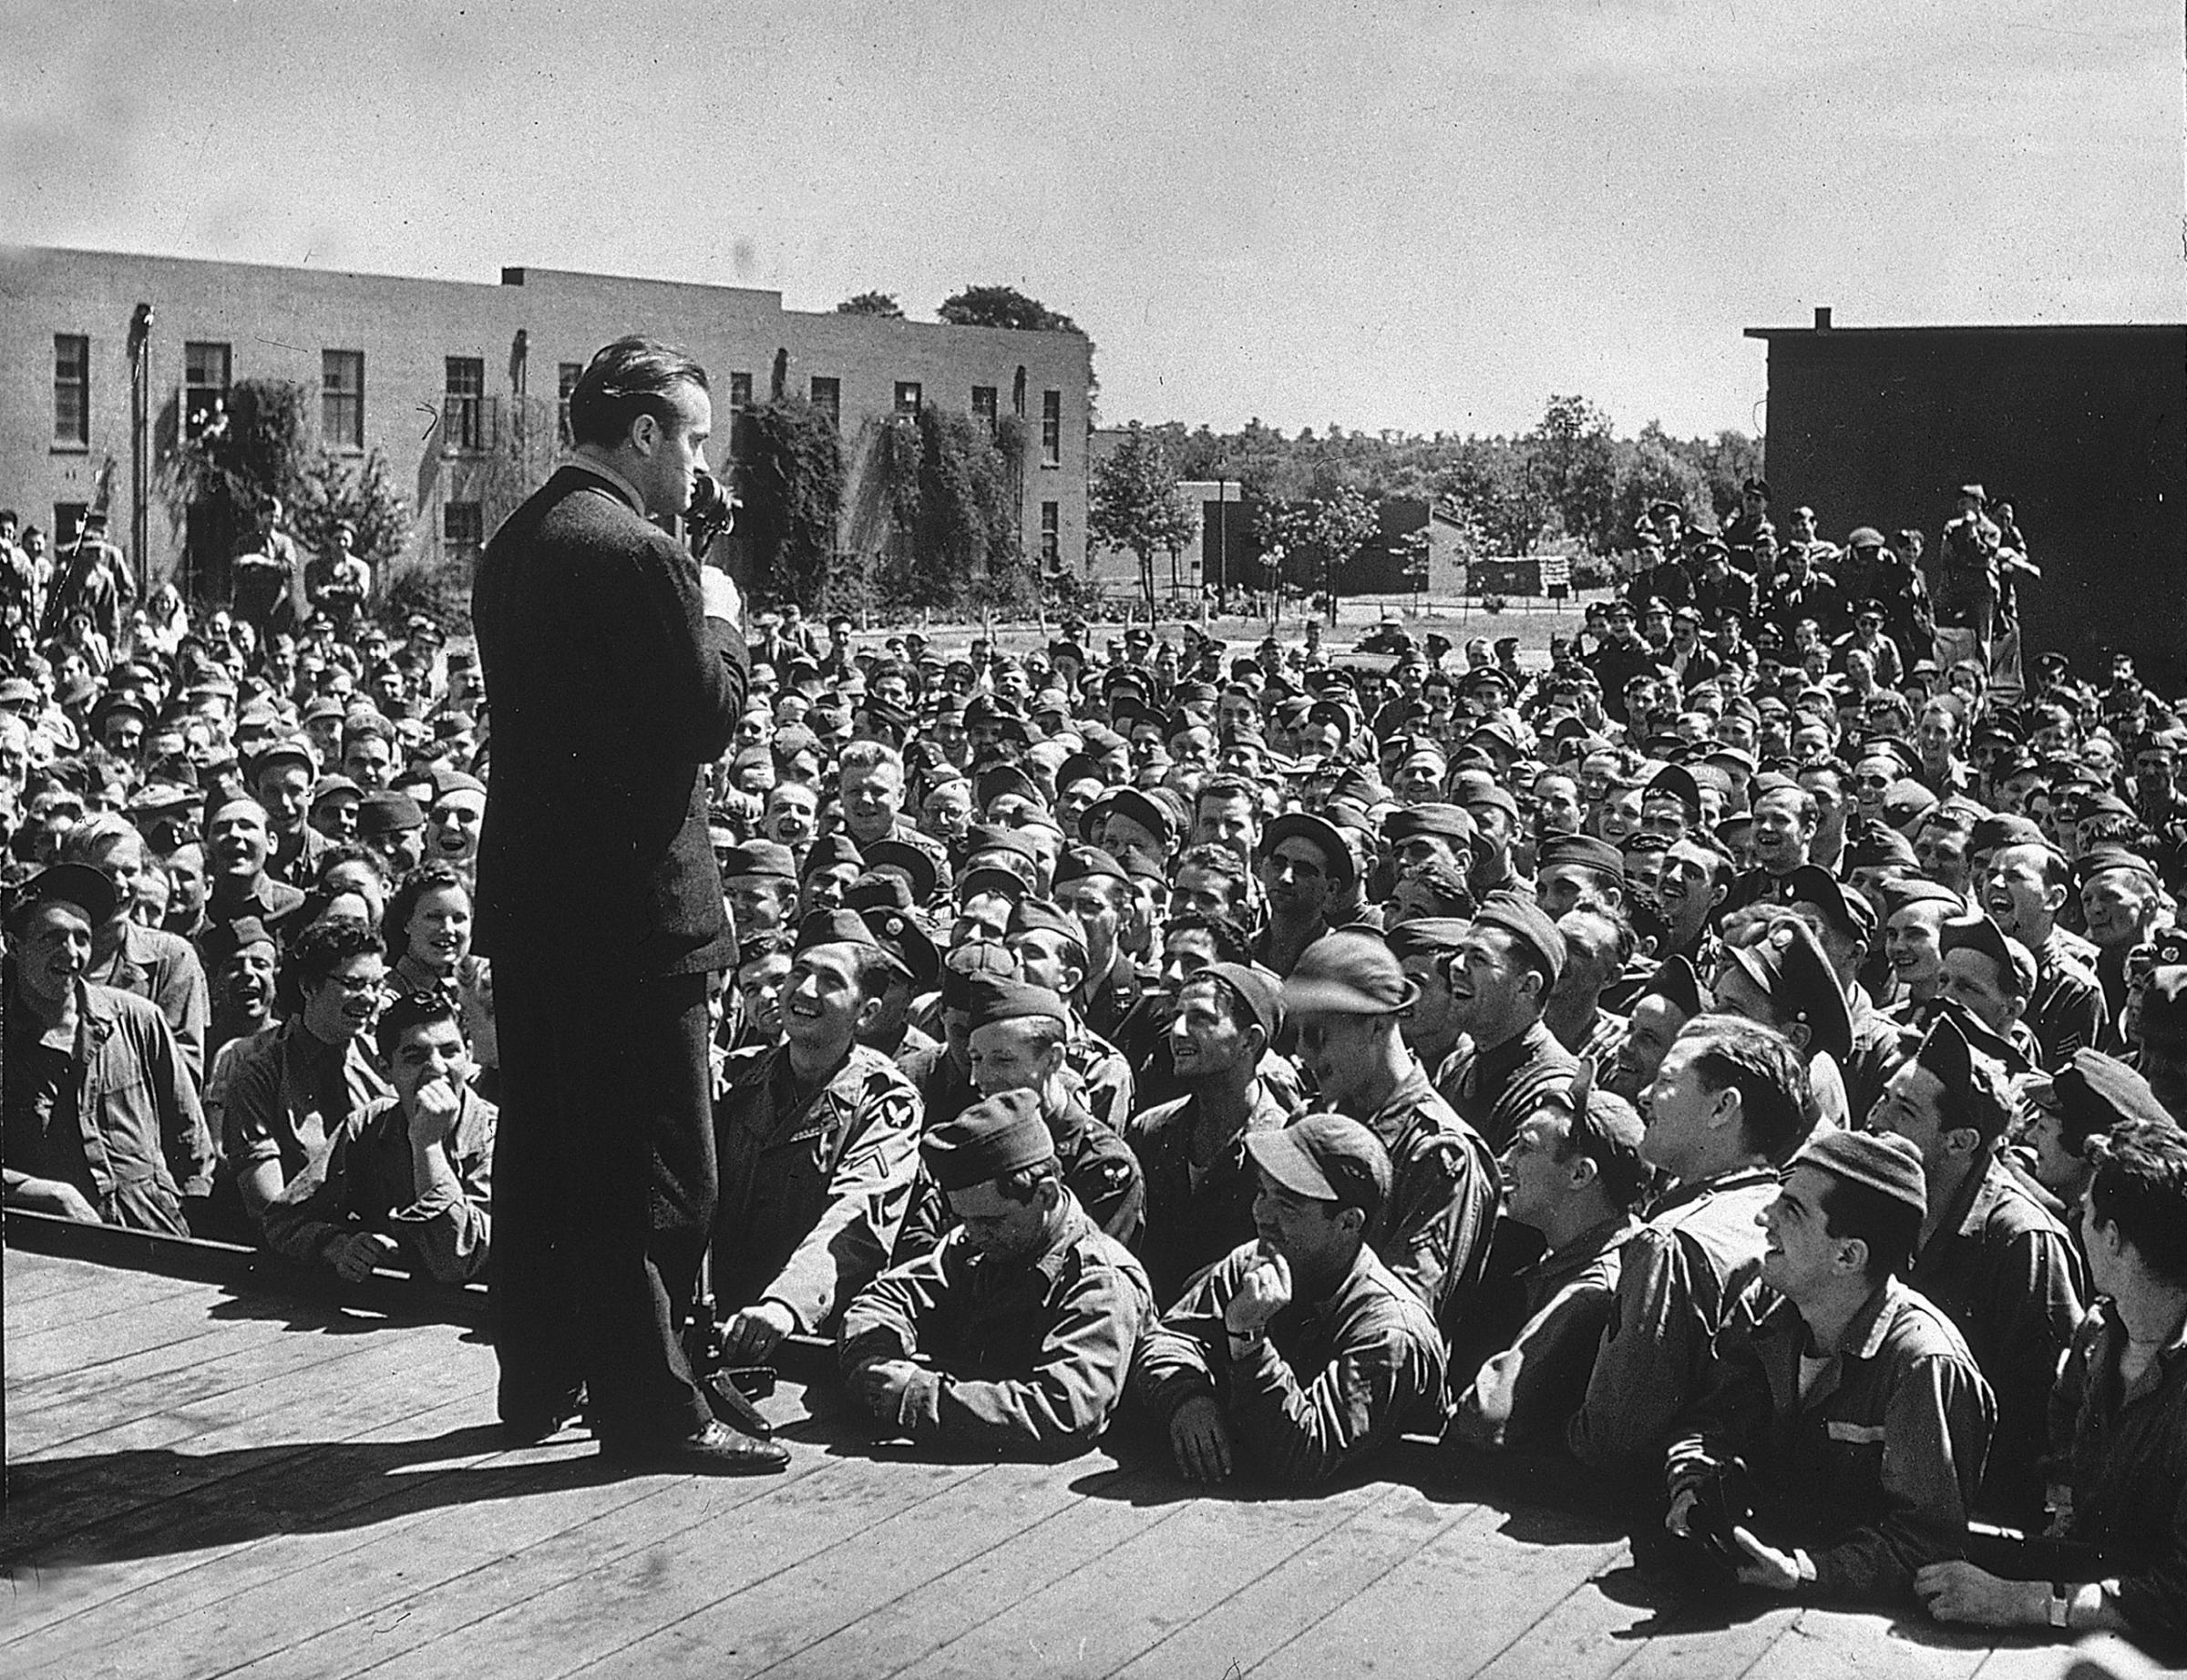 Bob Hope entertaining troops during WWII, 1943.